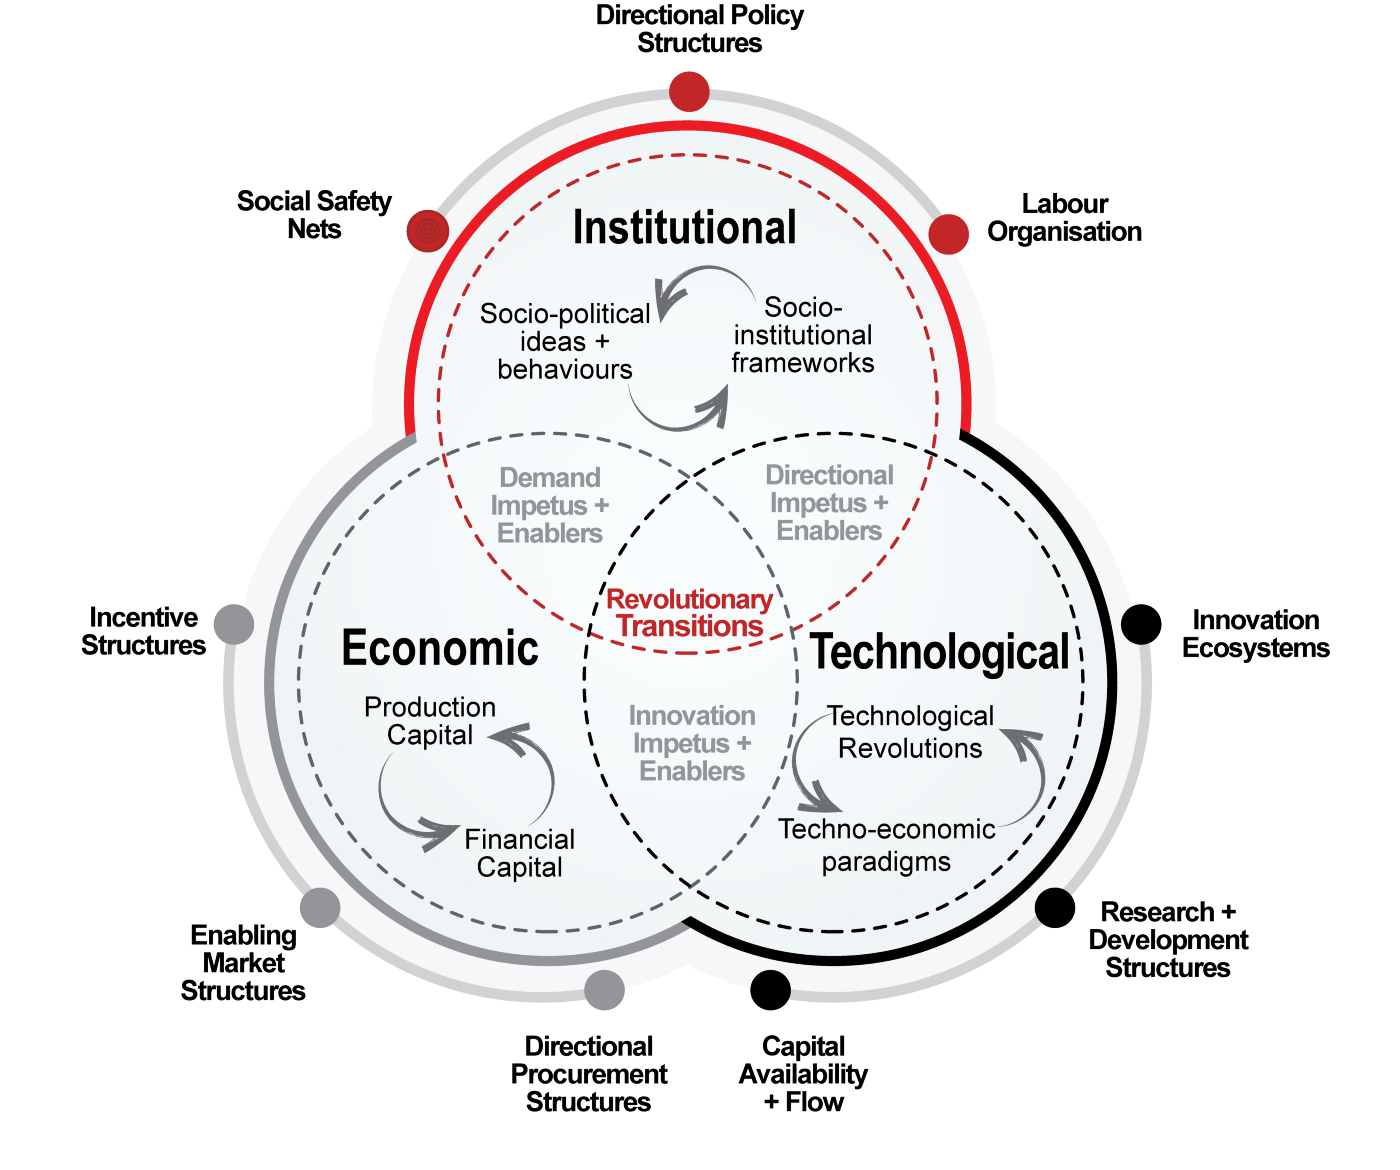 A ven diagram showing overlapping circles of Institional, Economic and Technological innovation — highlighing that Revolutionary Transitions occur when the three overlap.